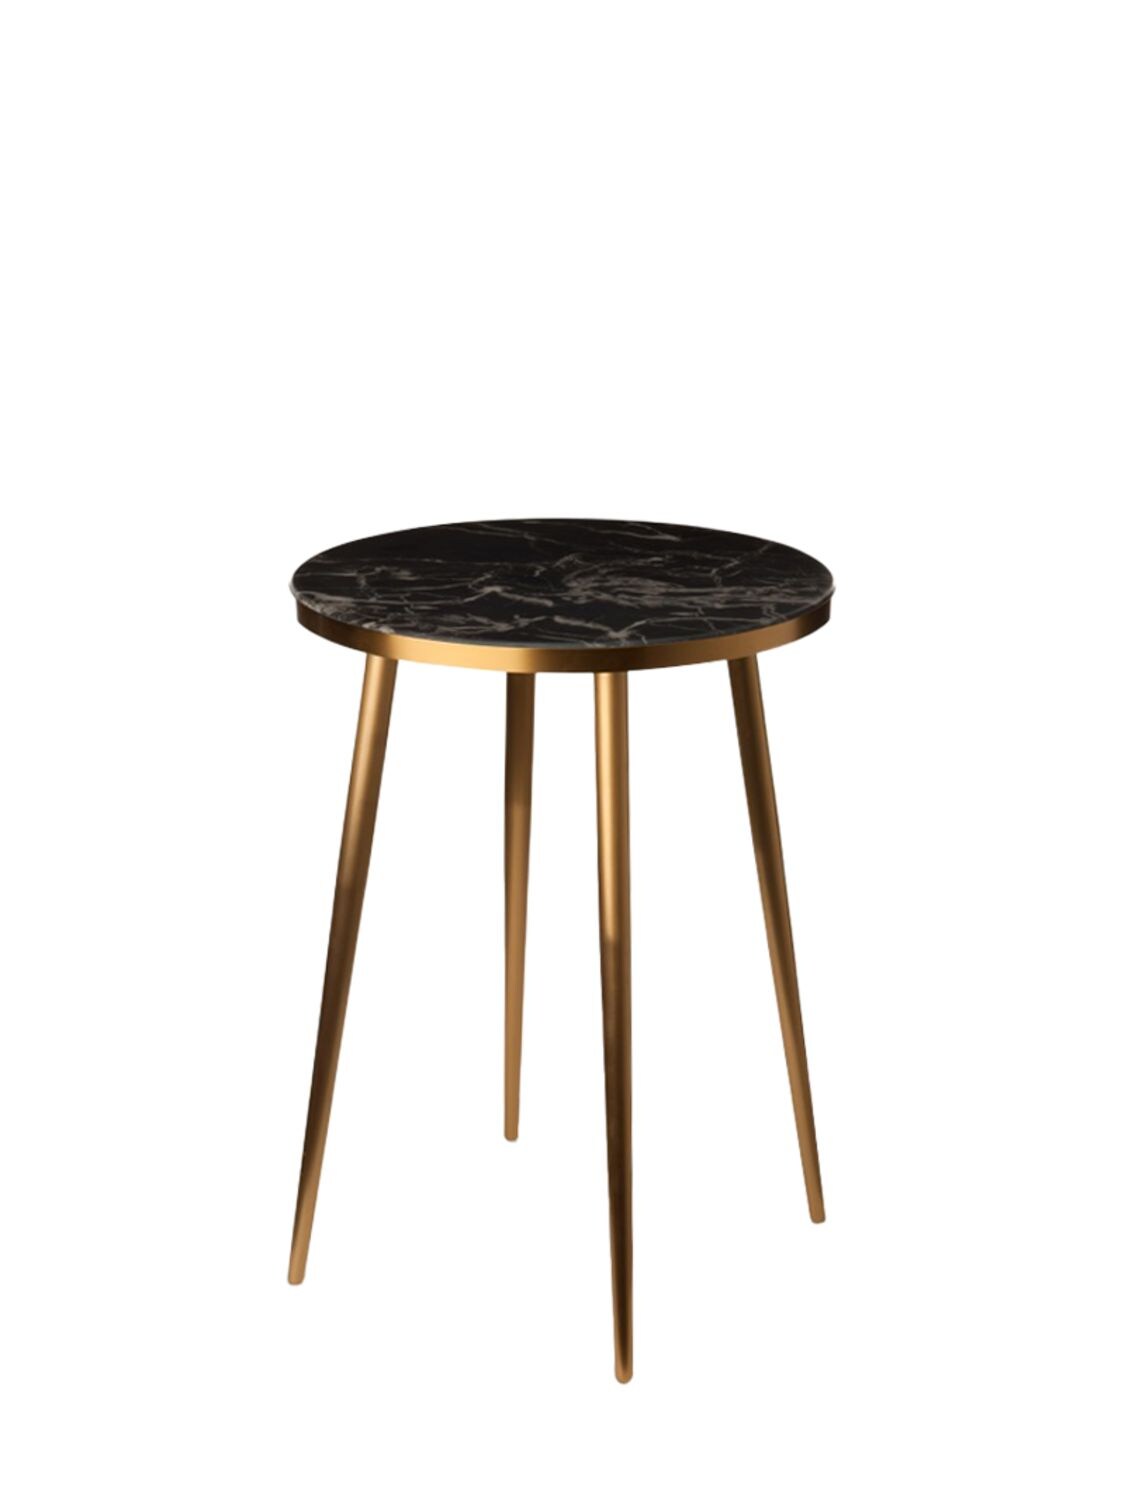 Pols Potten Marble Effect Side Table In Black,gold